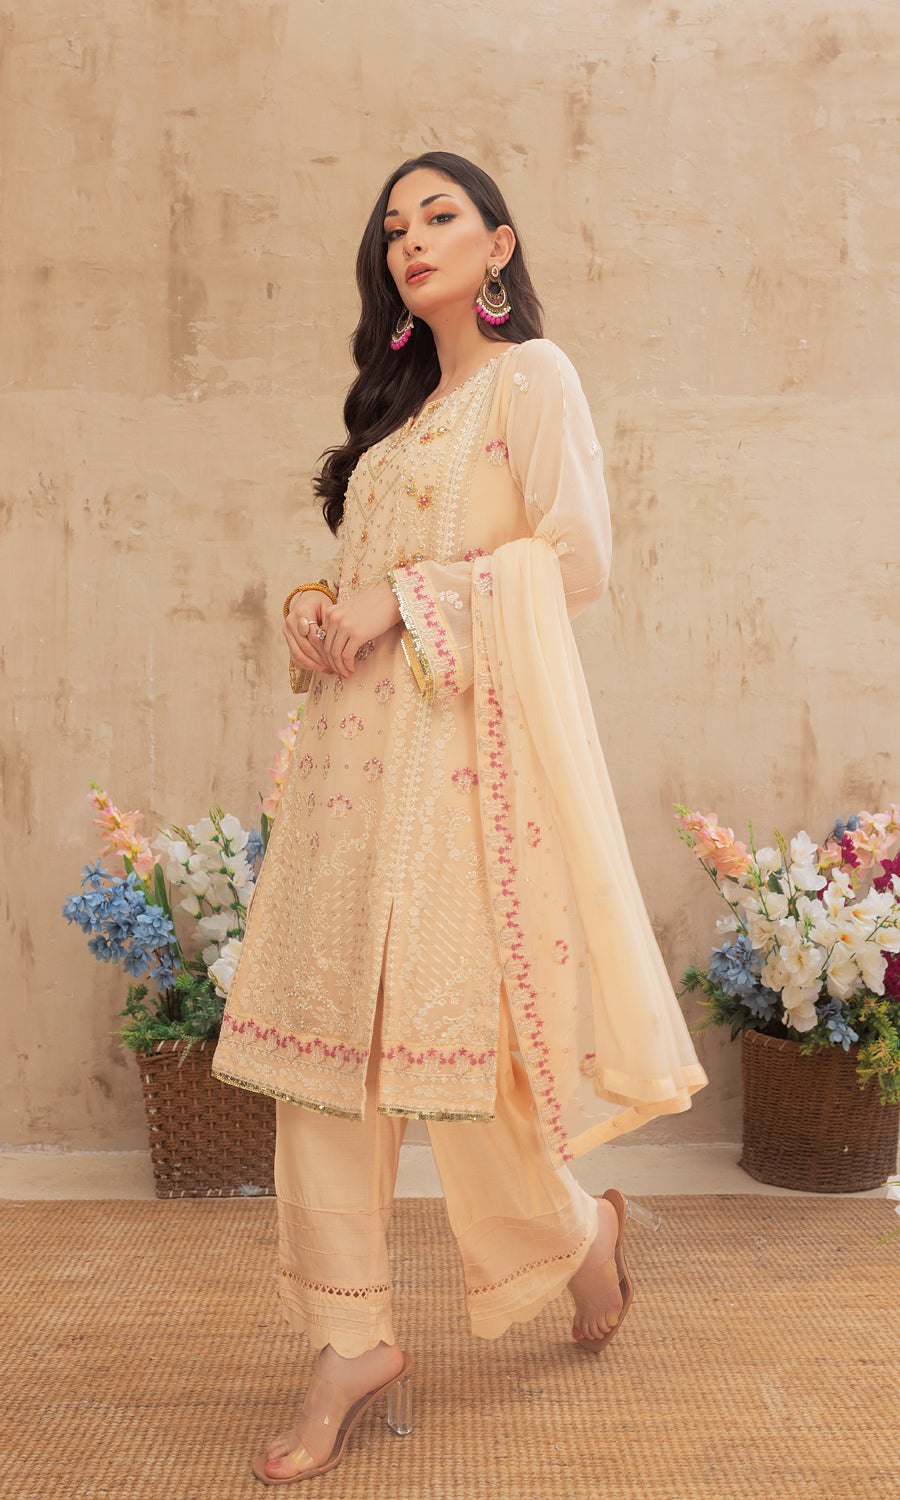 Shamooz. Mushq Volume 3. This elegance with style masterpiece with pastel color and embrodiery work on the front and side panel that enhances a blush of color.This elegant hand-embellished add-on sparkle of glamour.This ensemble is a perfect balance of every occassion.